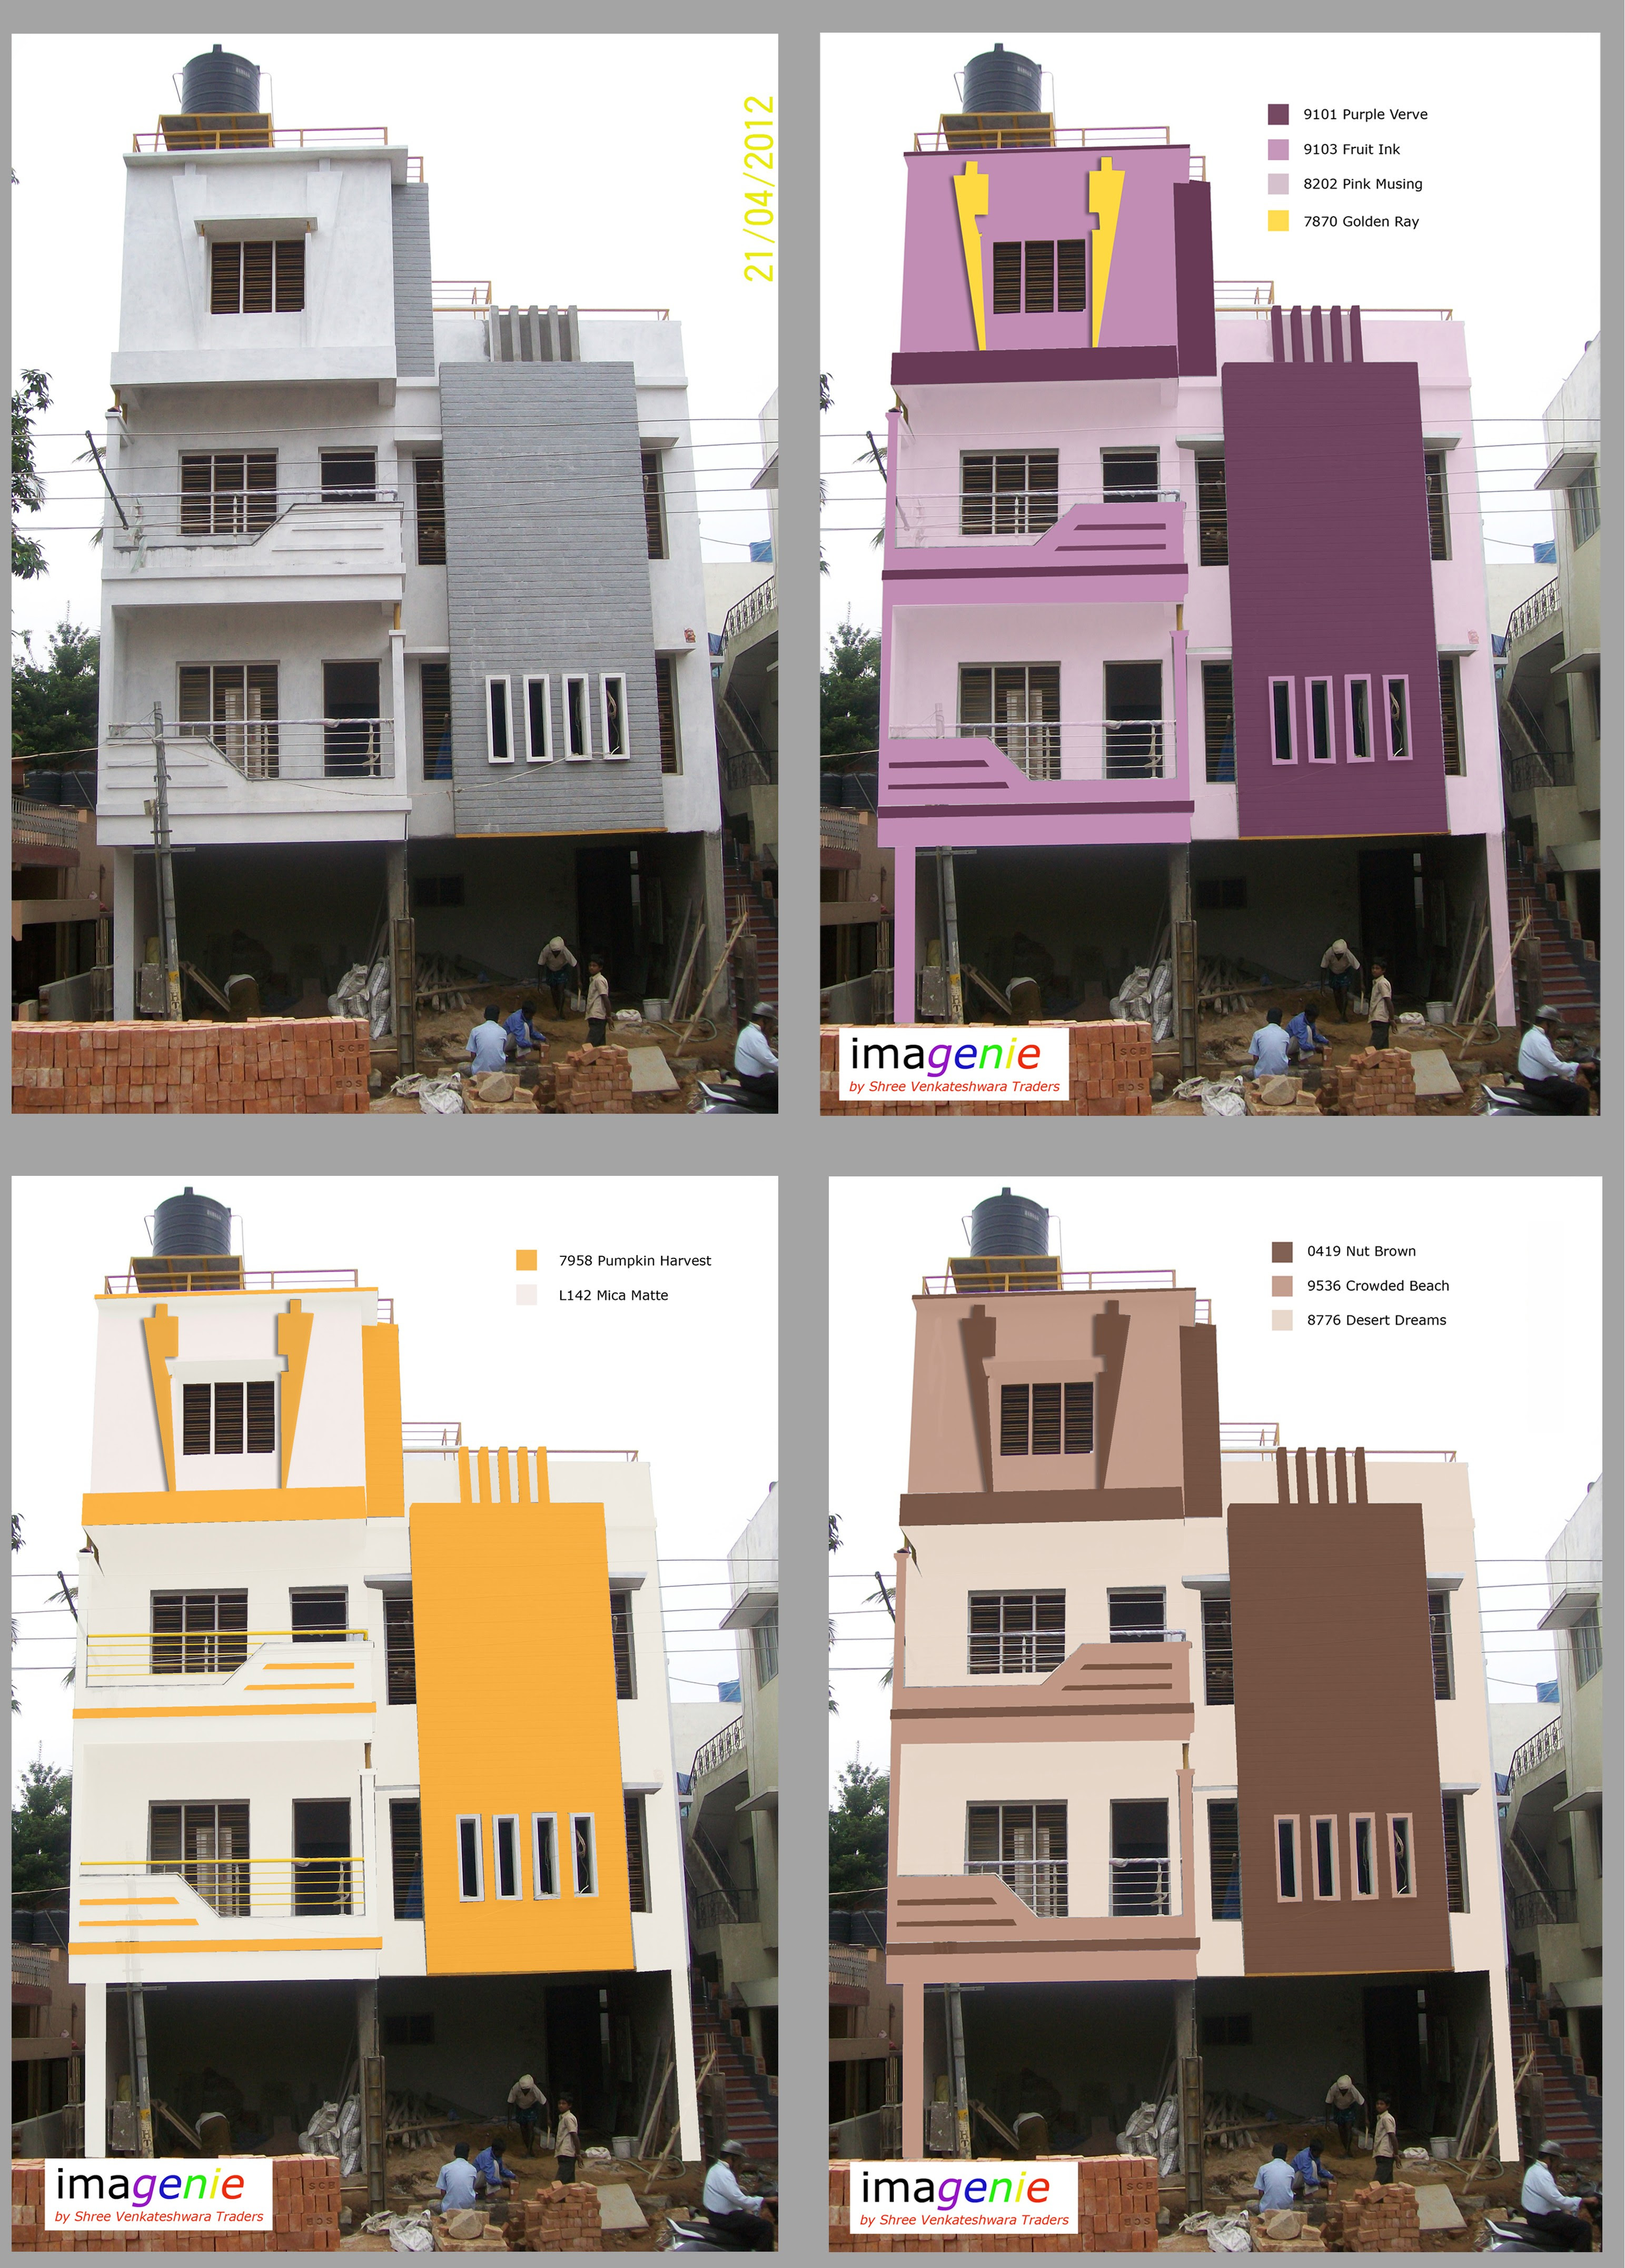 25 Inspiring Exterior House Paint Color Ideas Asian Paints Exterior Color Shades Visit inspiration gallery for wall painting ideas & colour combinations for walls. 25 inspiring exterior house paint color ideas blogger